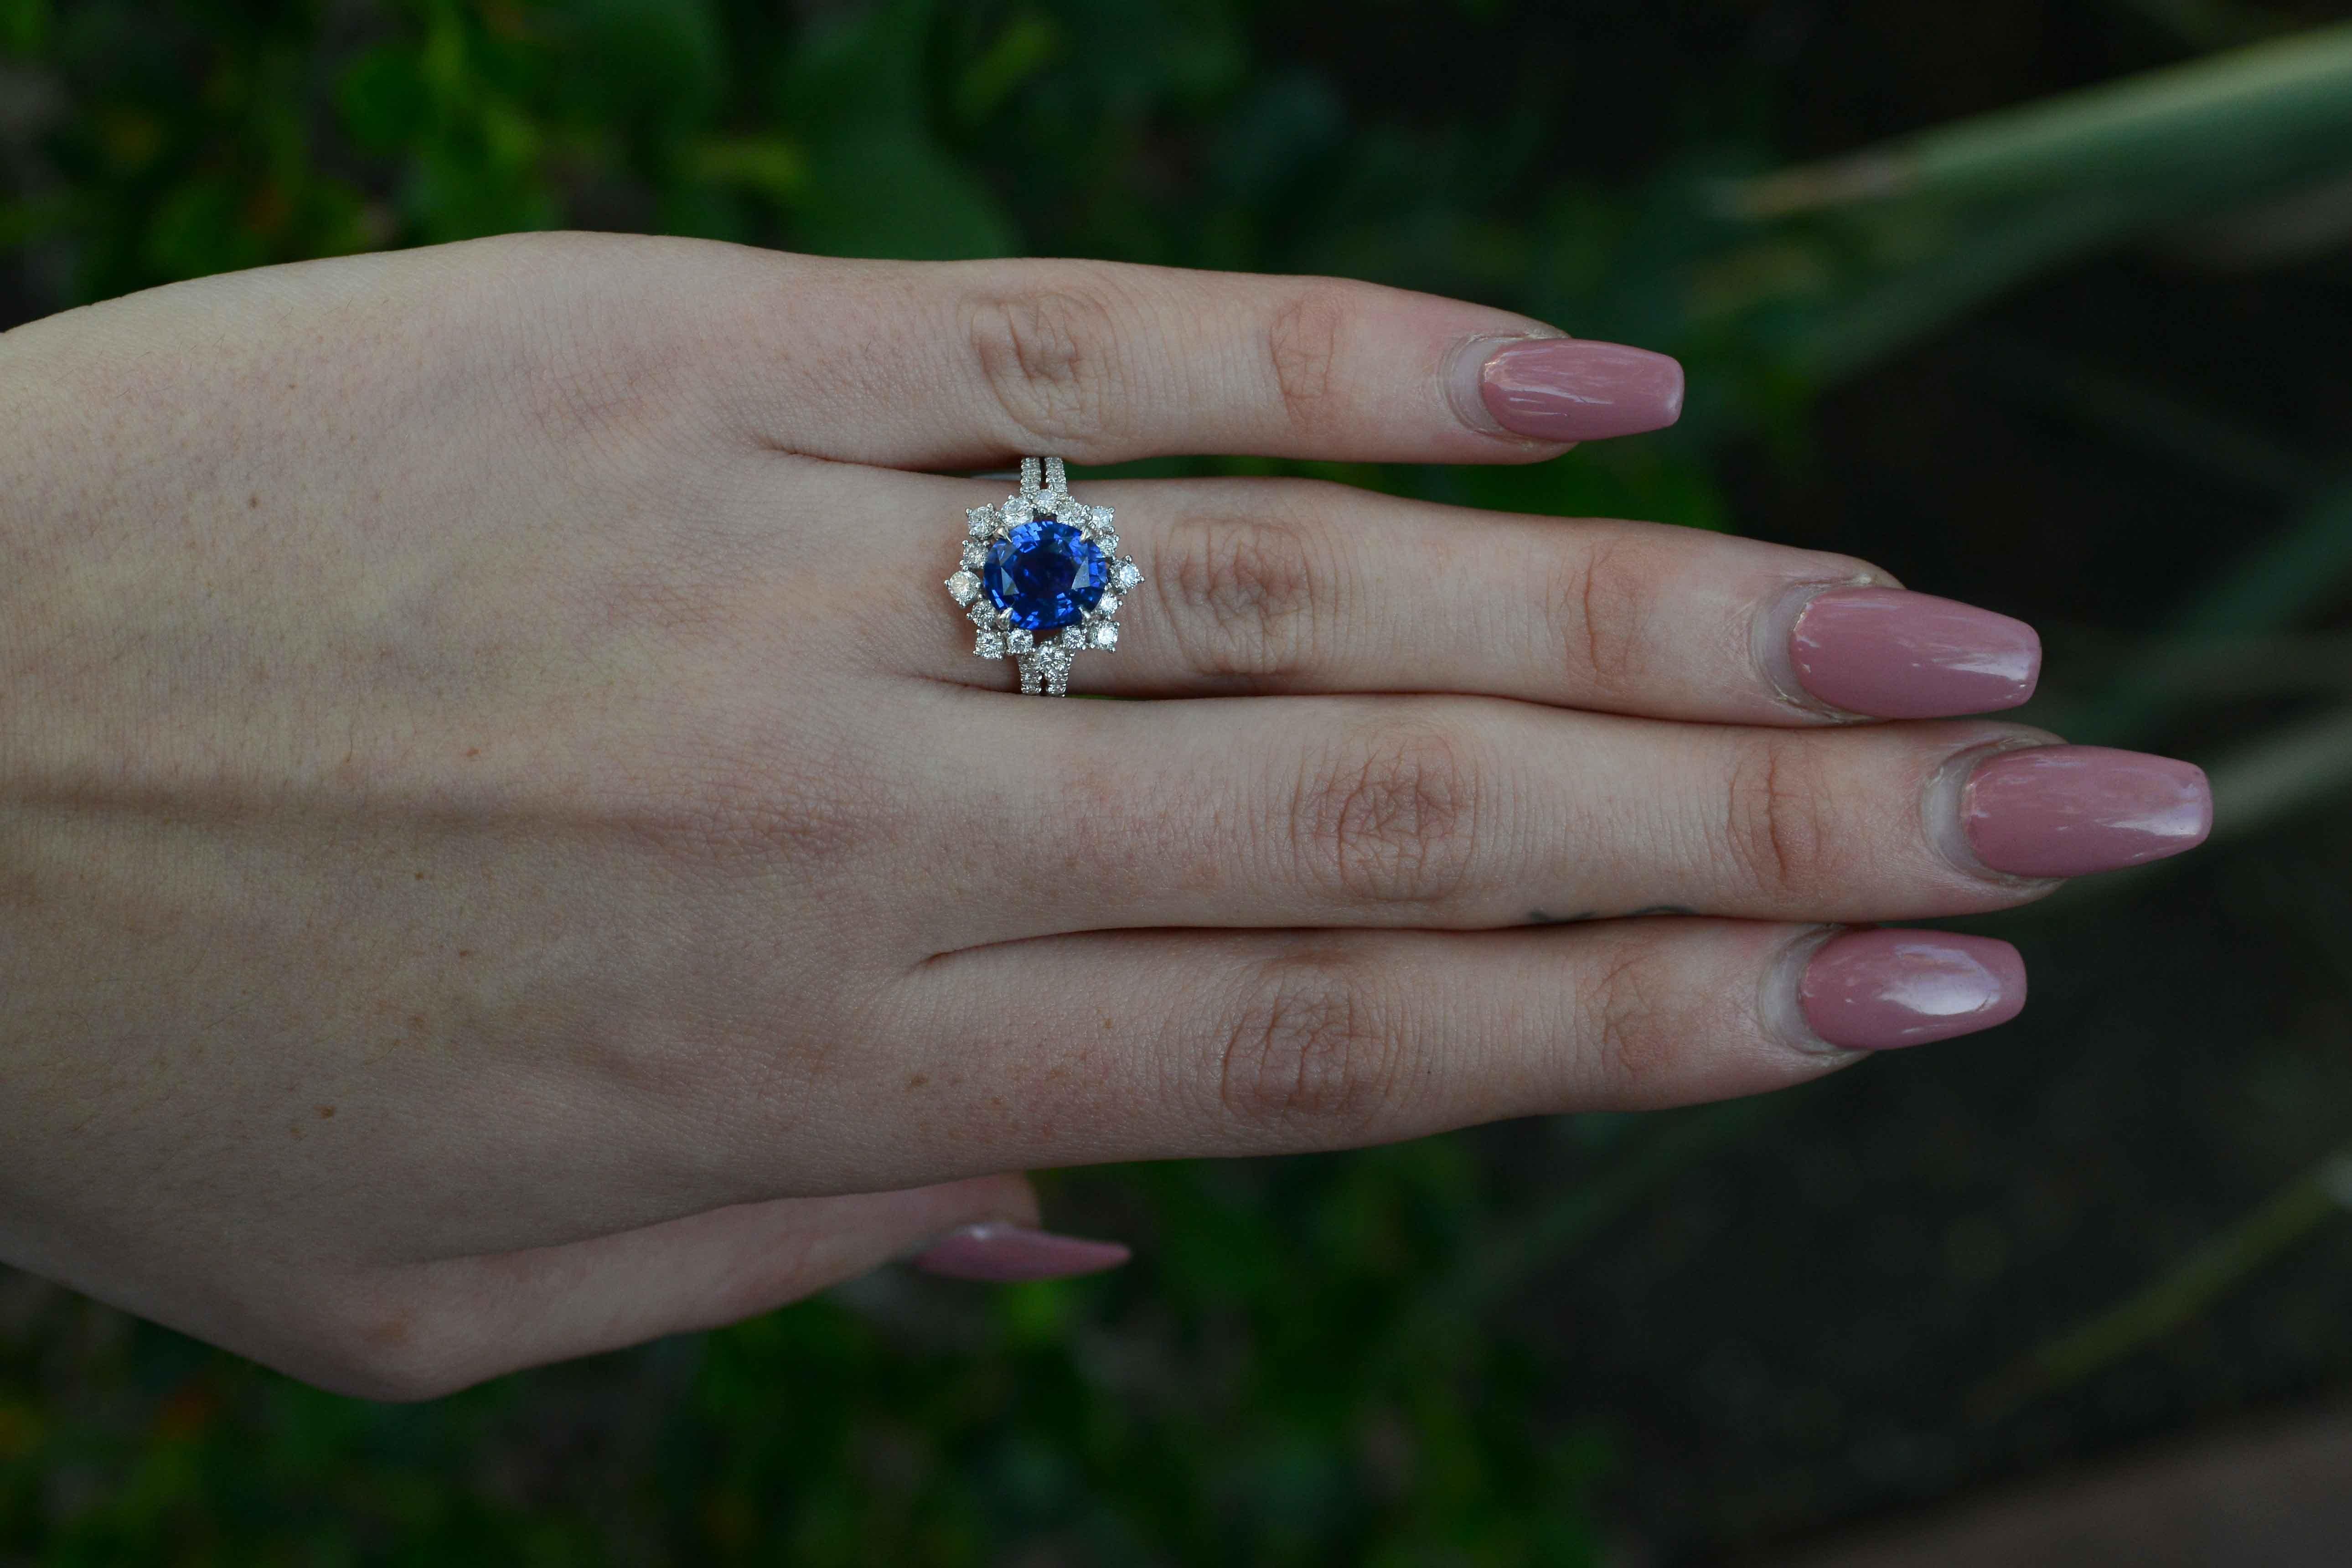 The electric blue of this certified, fine 2.77 carat gemstone is exceptional. Surrounded with a fiery 1 carat diamond halo, this vintage heirloom has us abuzz with excitement. The incredible luster and vivid color is mesmerizing. The composition